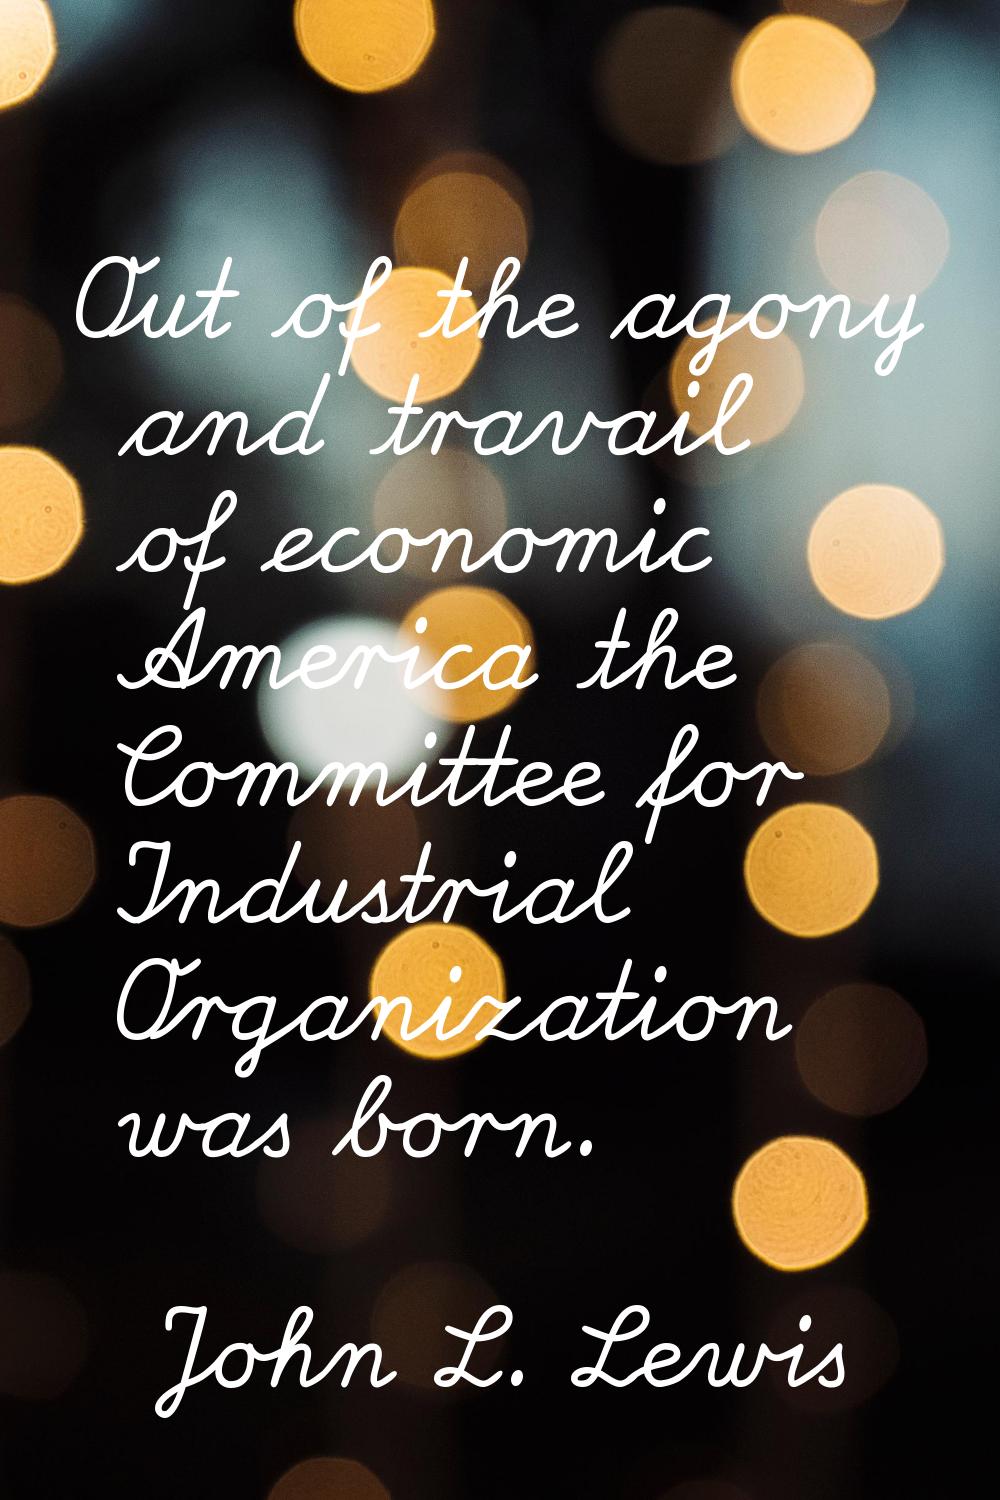 Out of the agony and travail of economic America the Committee for Industrial Organization was born